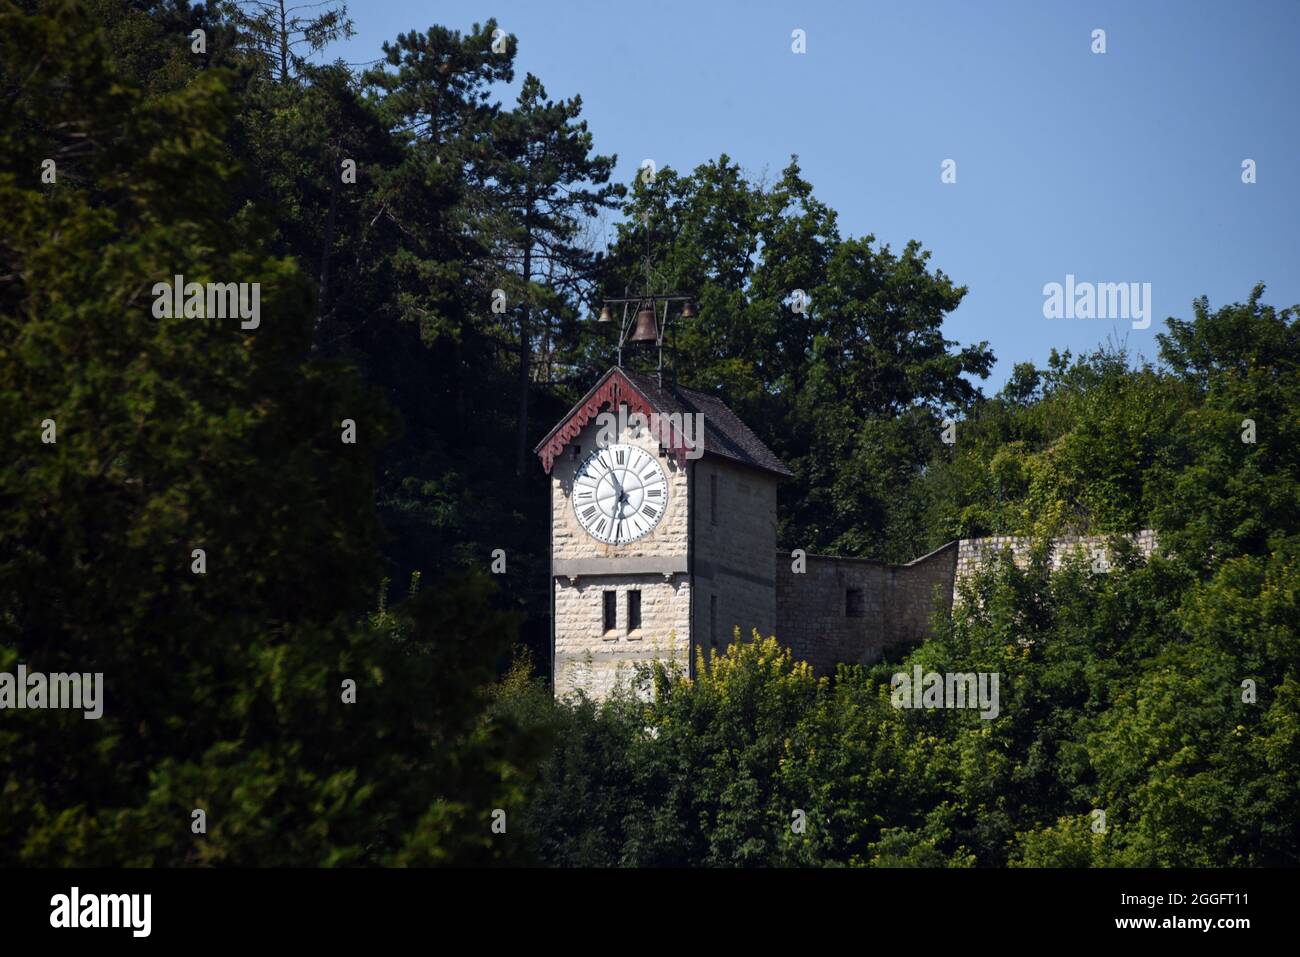 A historic clock tower in Bar-sur-Seine, France Stock Photo